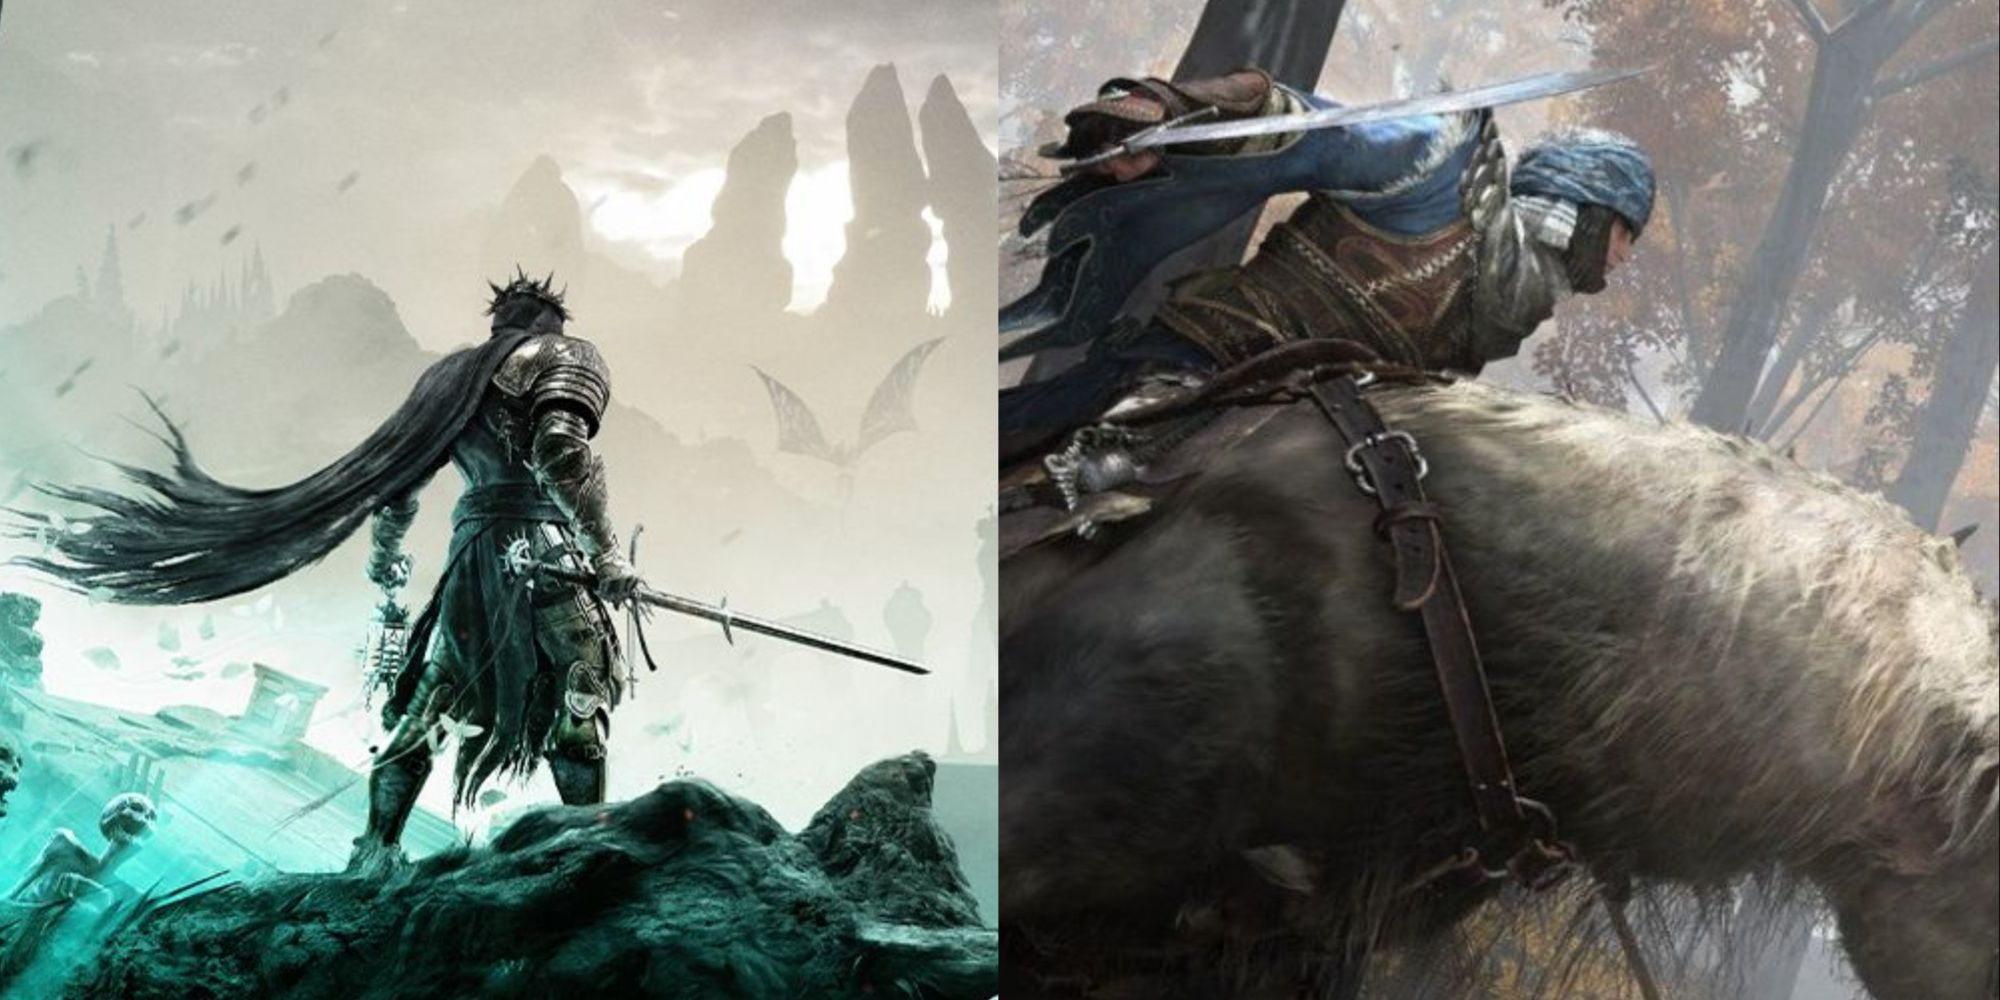 a collage of elden ring character riding a horse and lords of the fallen character wielding a sword against skeletons